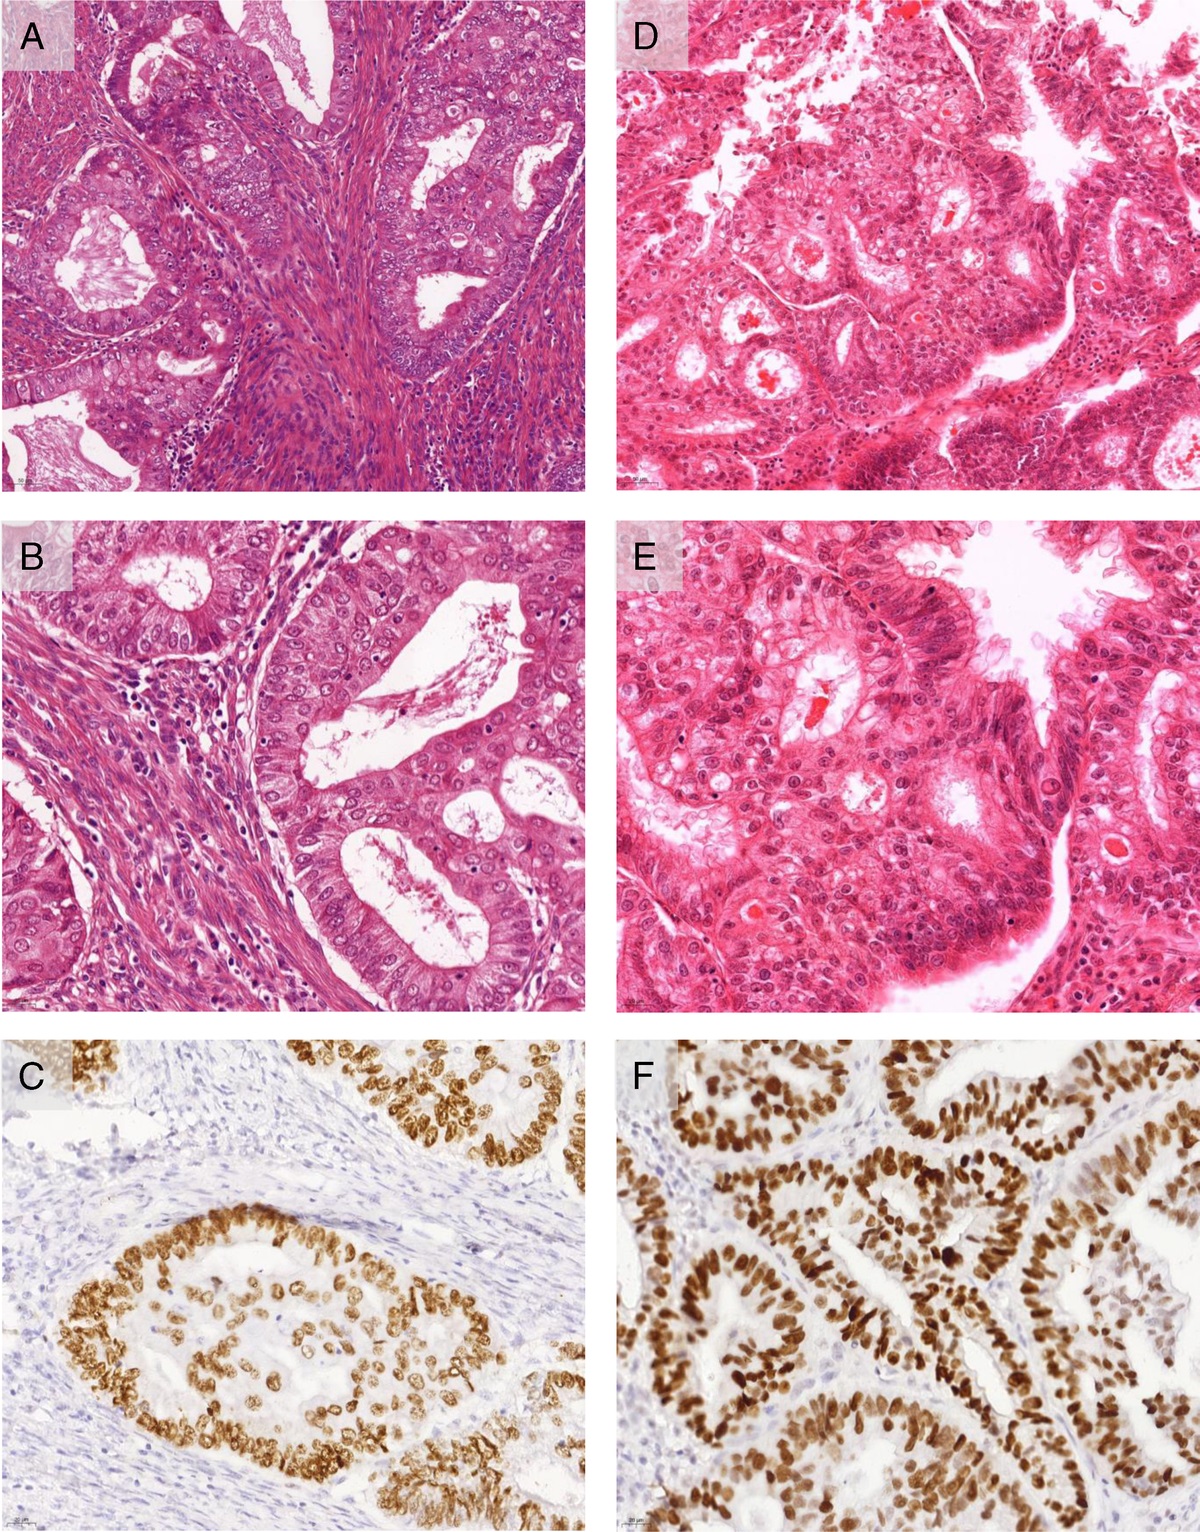 The Best of Both Worlds: Combining the Molecular and Traditional (Histotype/Grade) Endometrial Cancer Classification